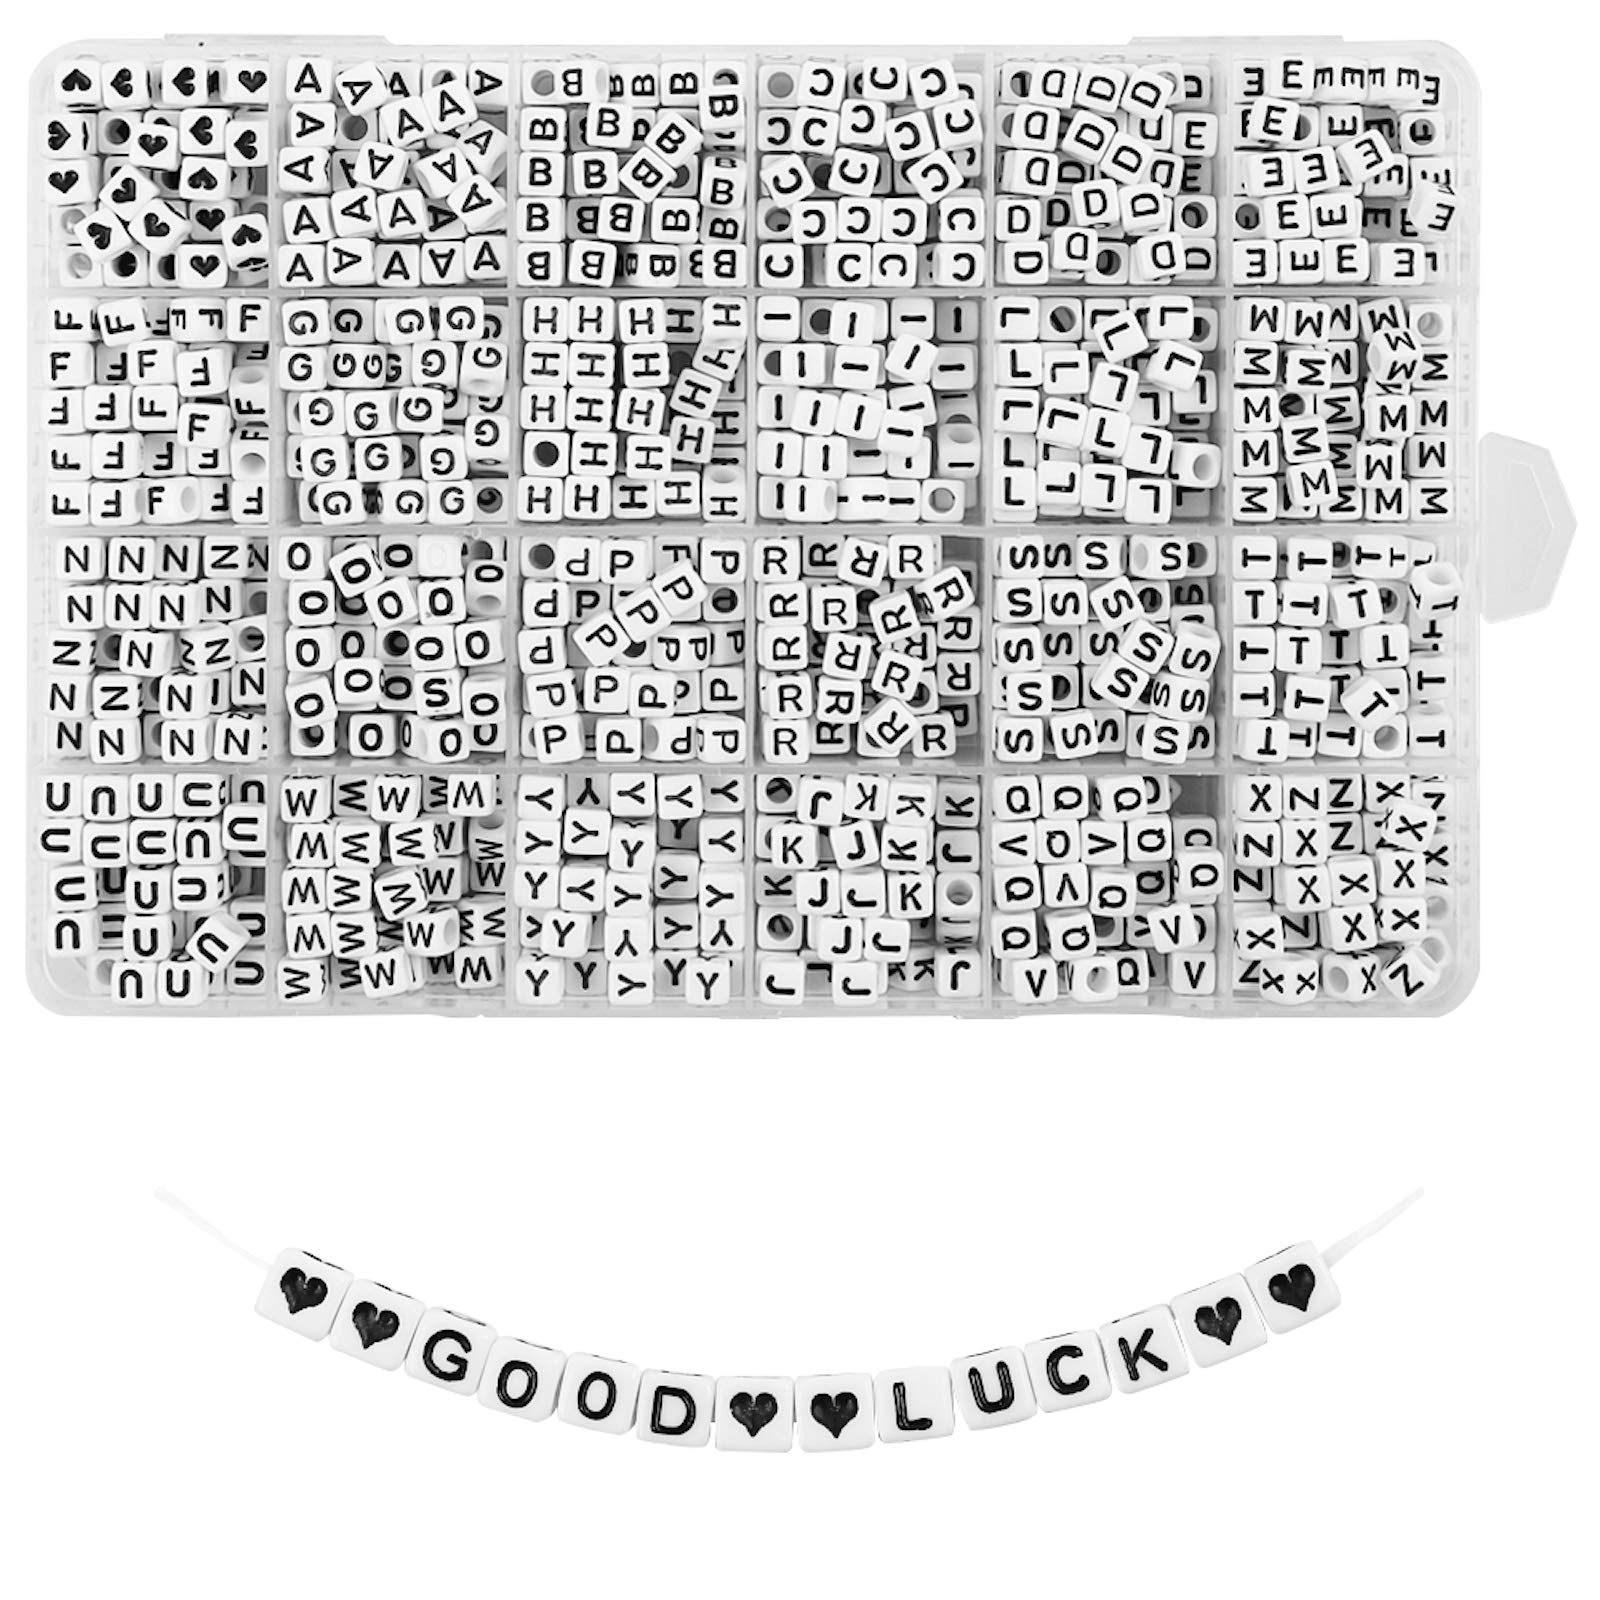 Letter Beads 6mm White (100 Pieces)